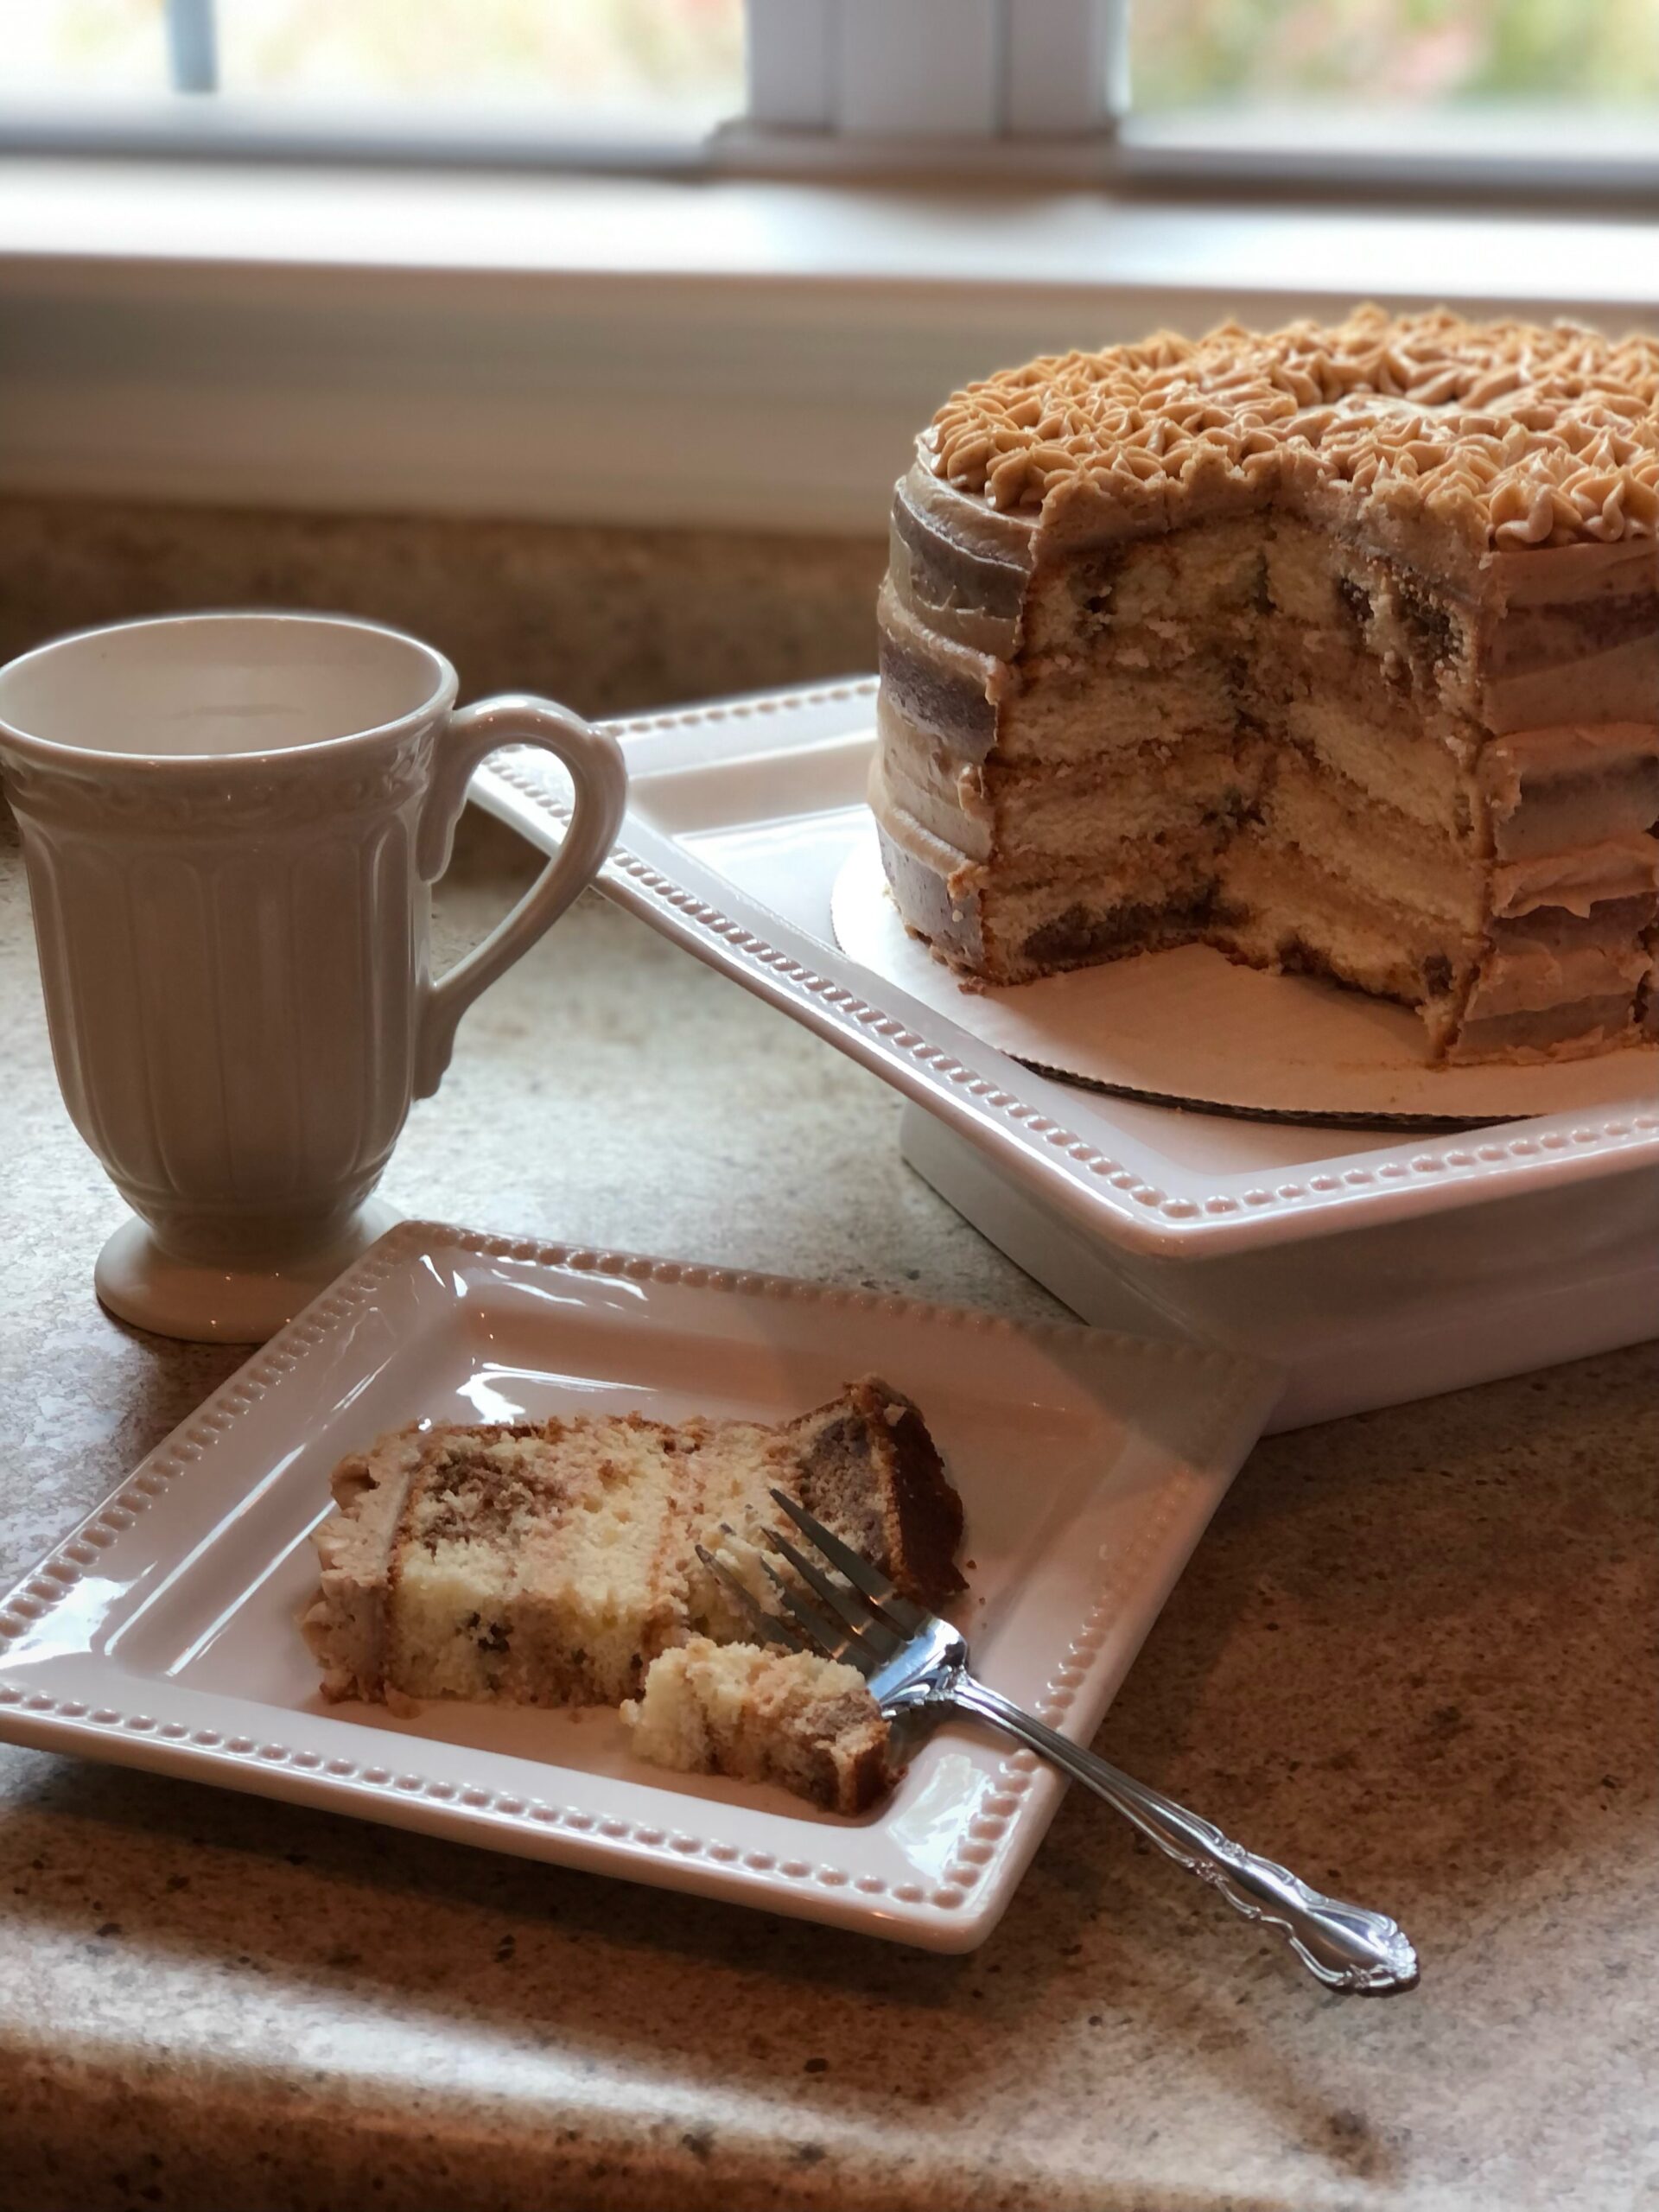 a slice of snickerdoodle cake in front of the cake and a cup of tea